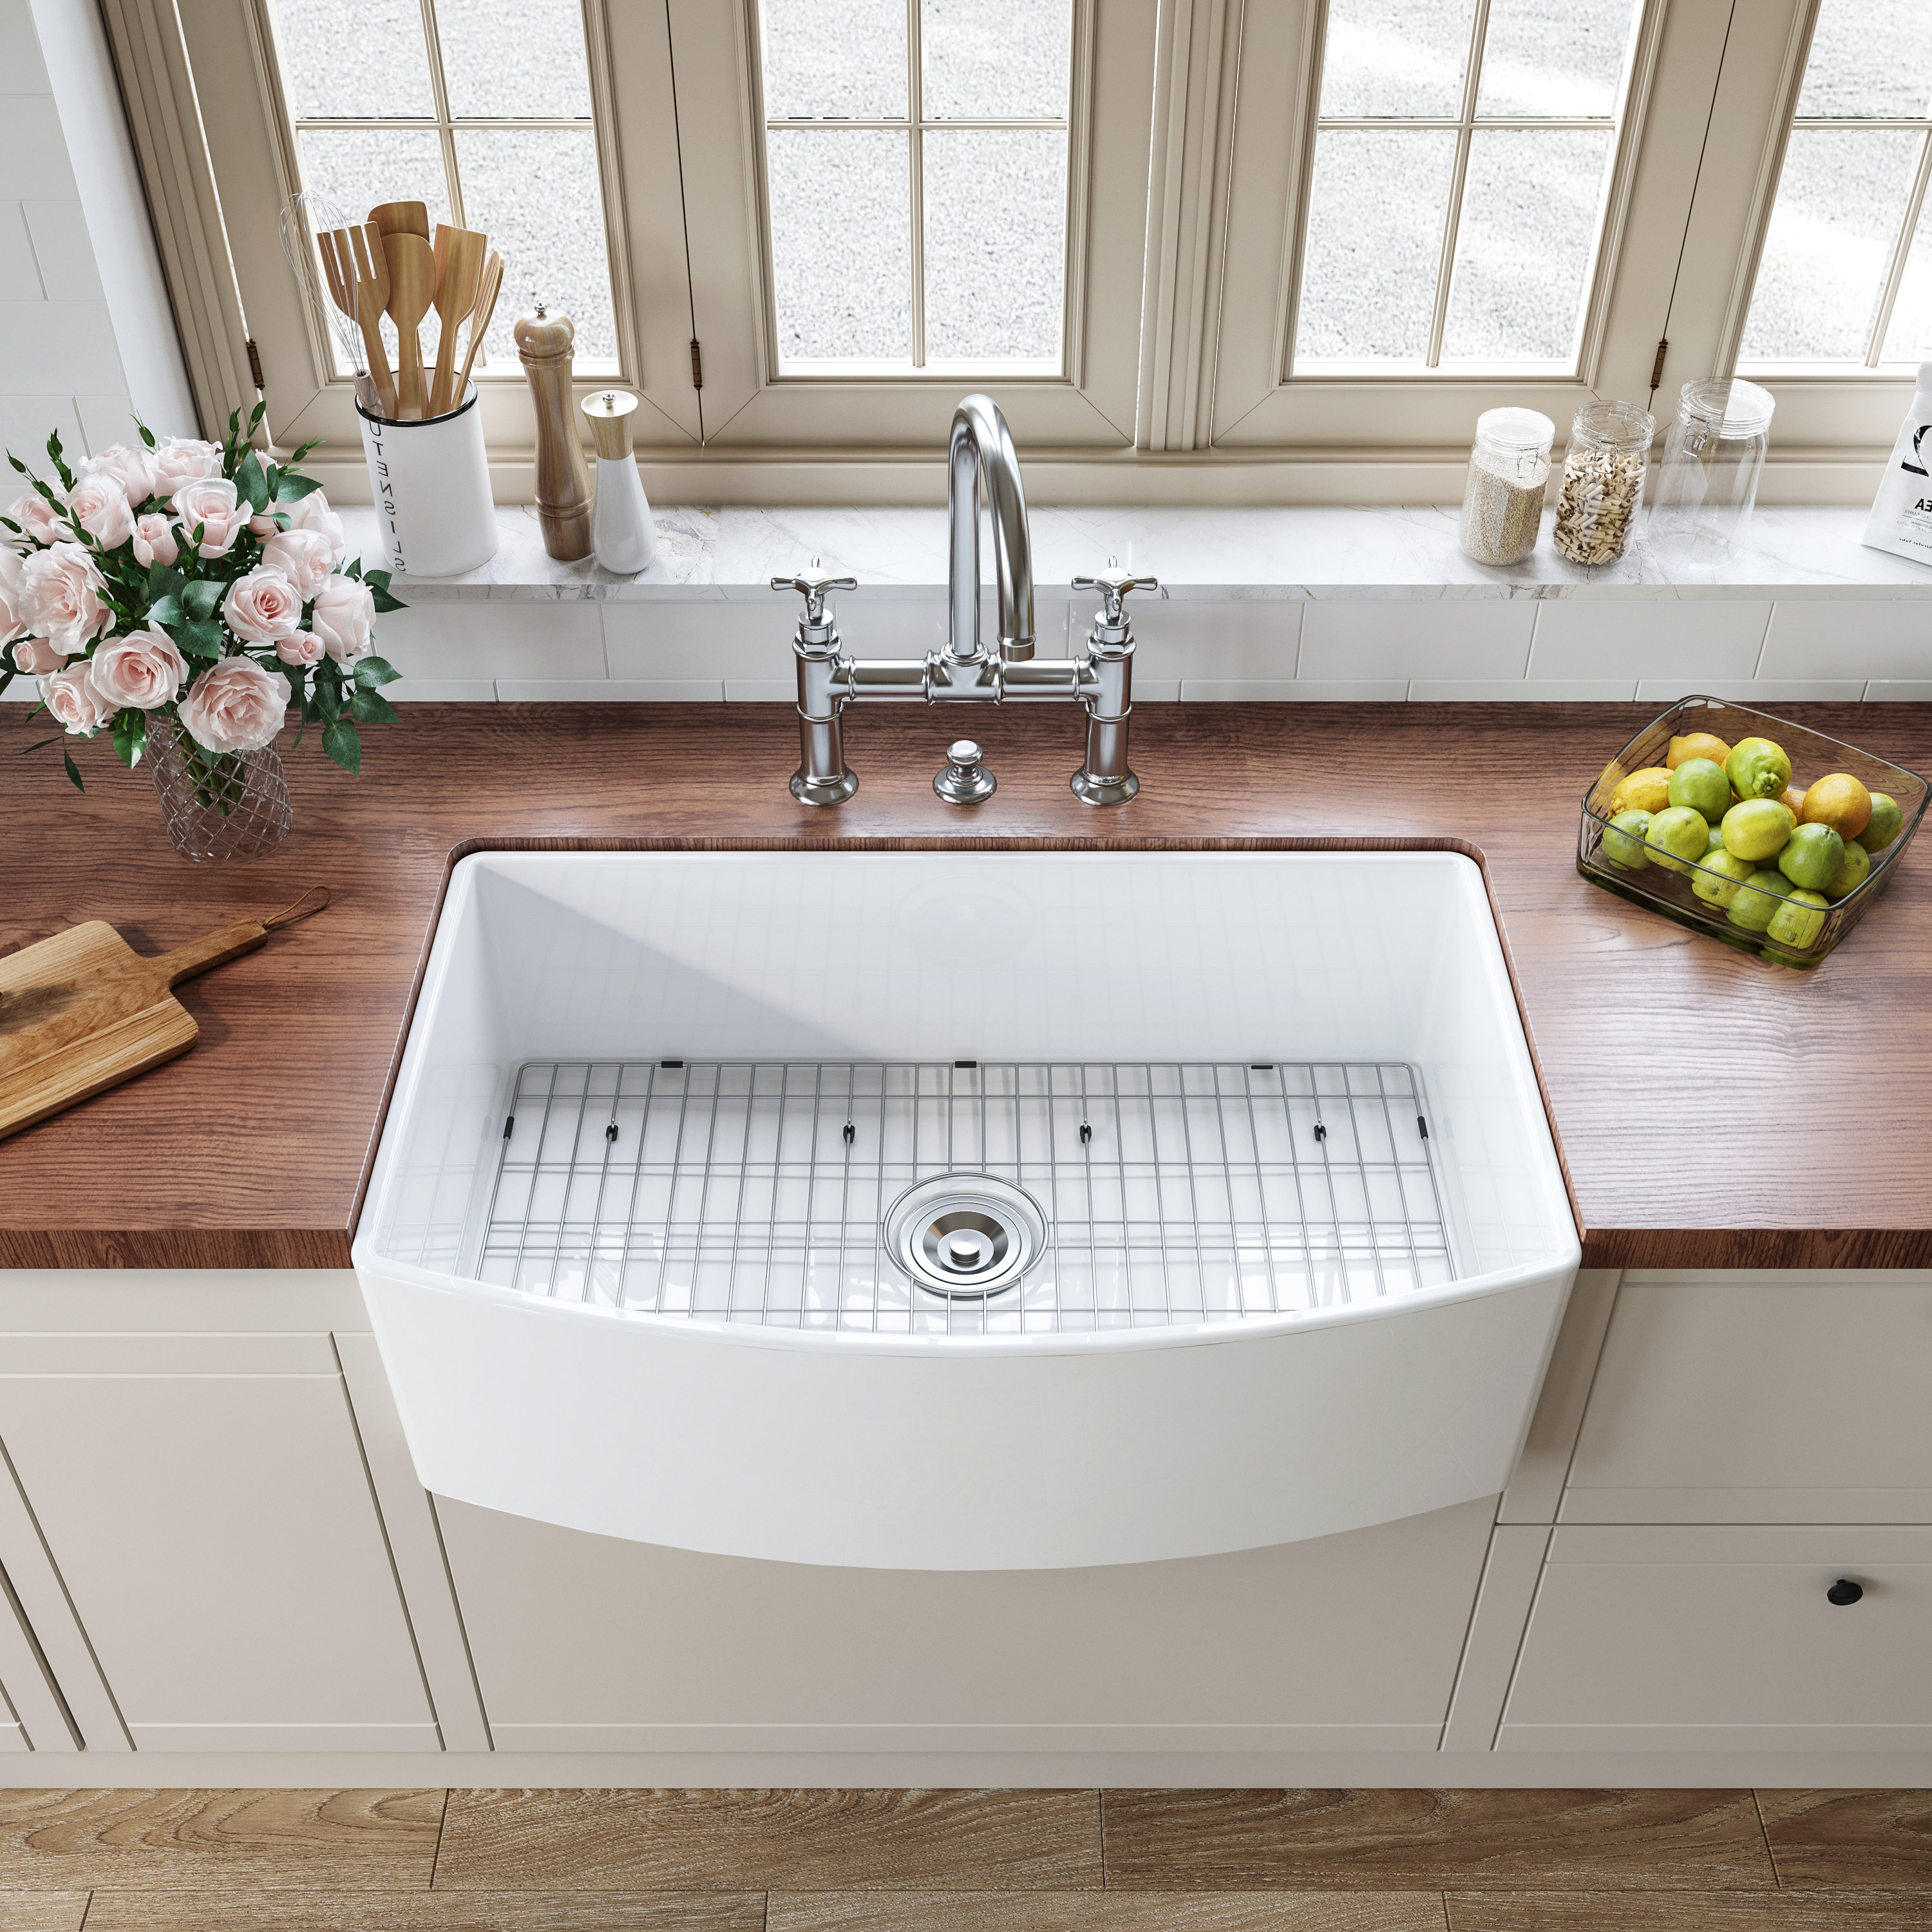 6 Things to Know Before Buying a Porcelain Farmhouse Sink